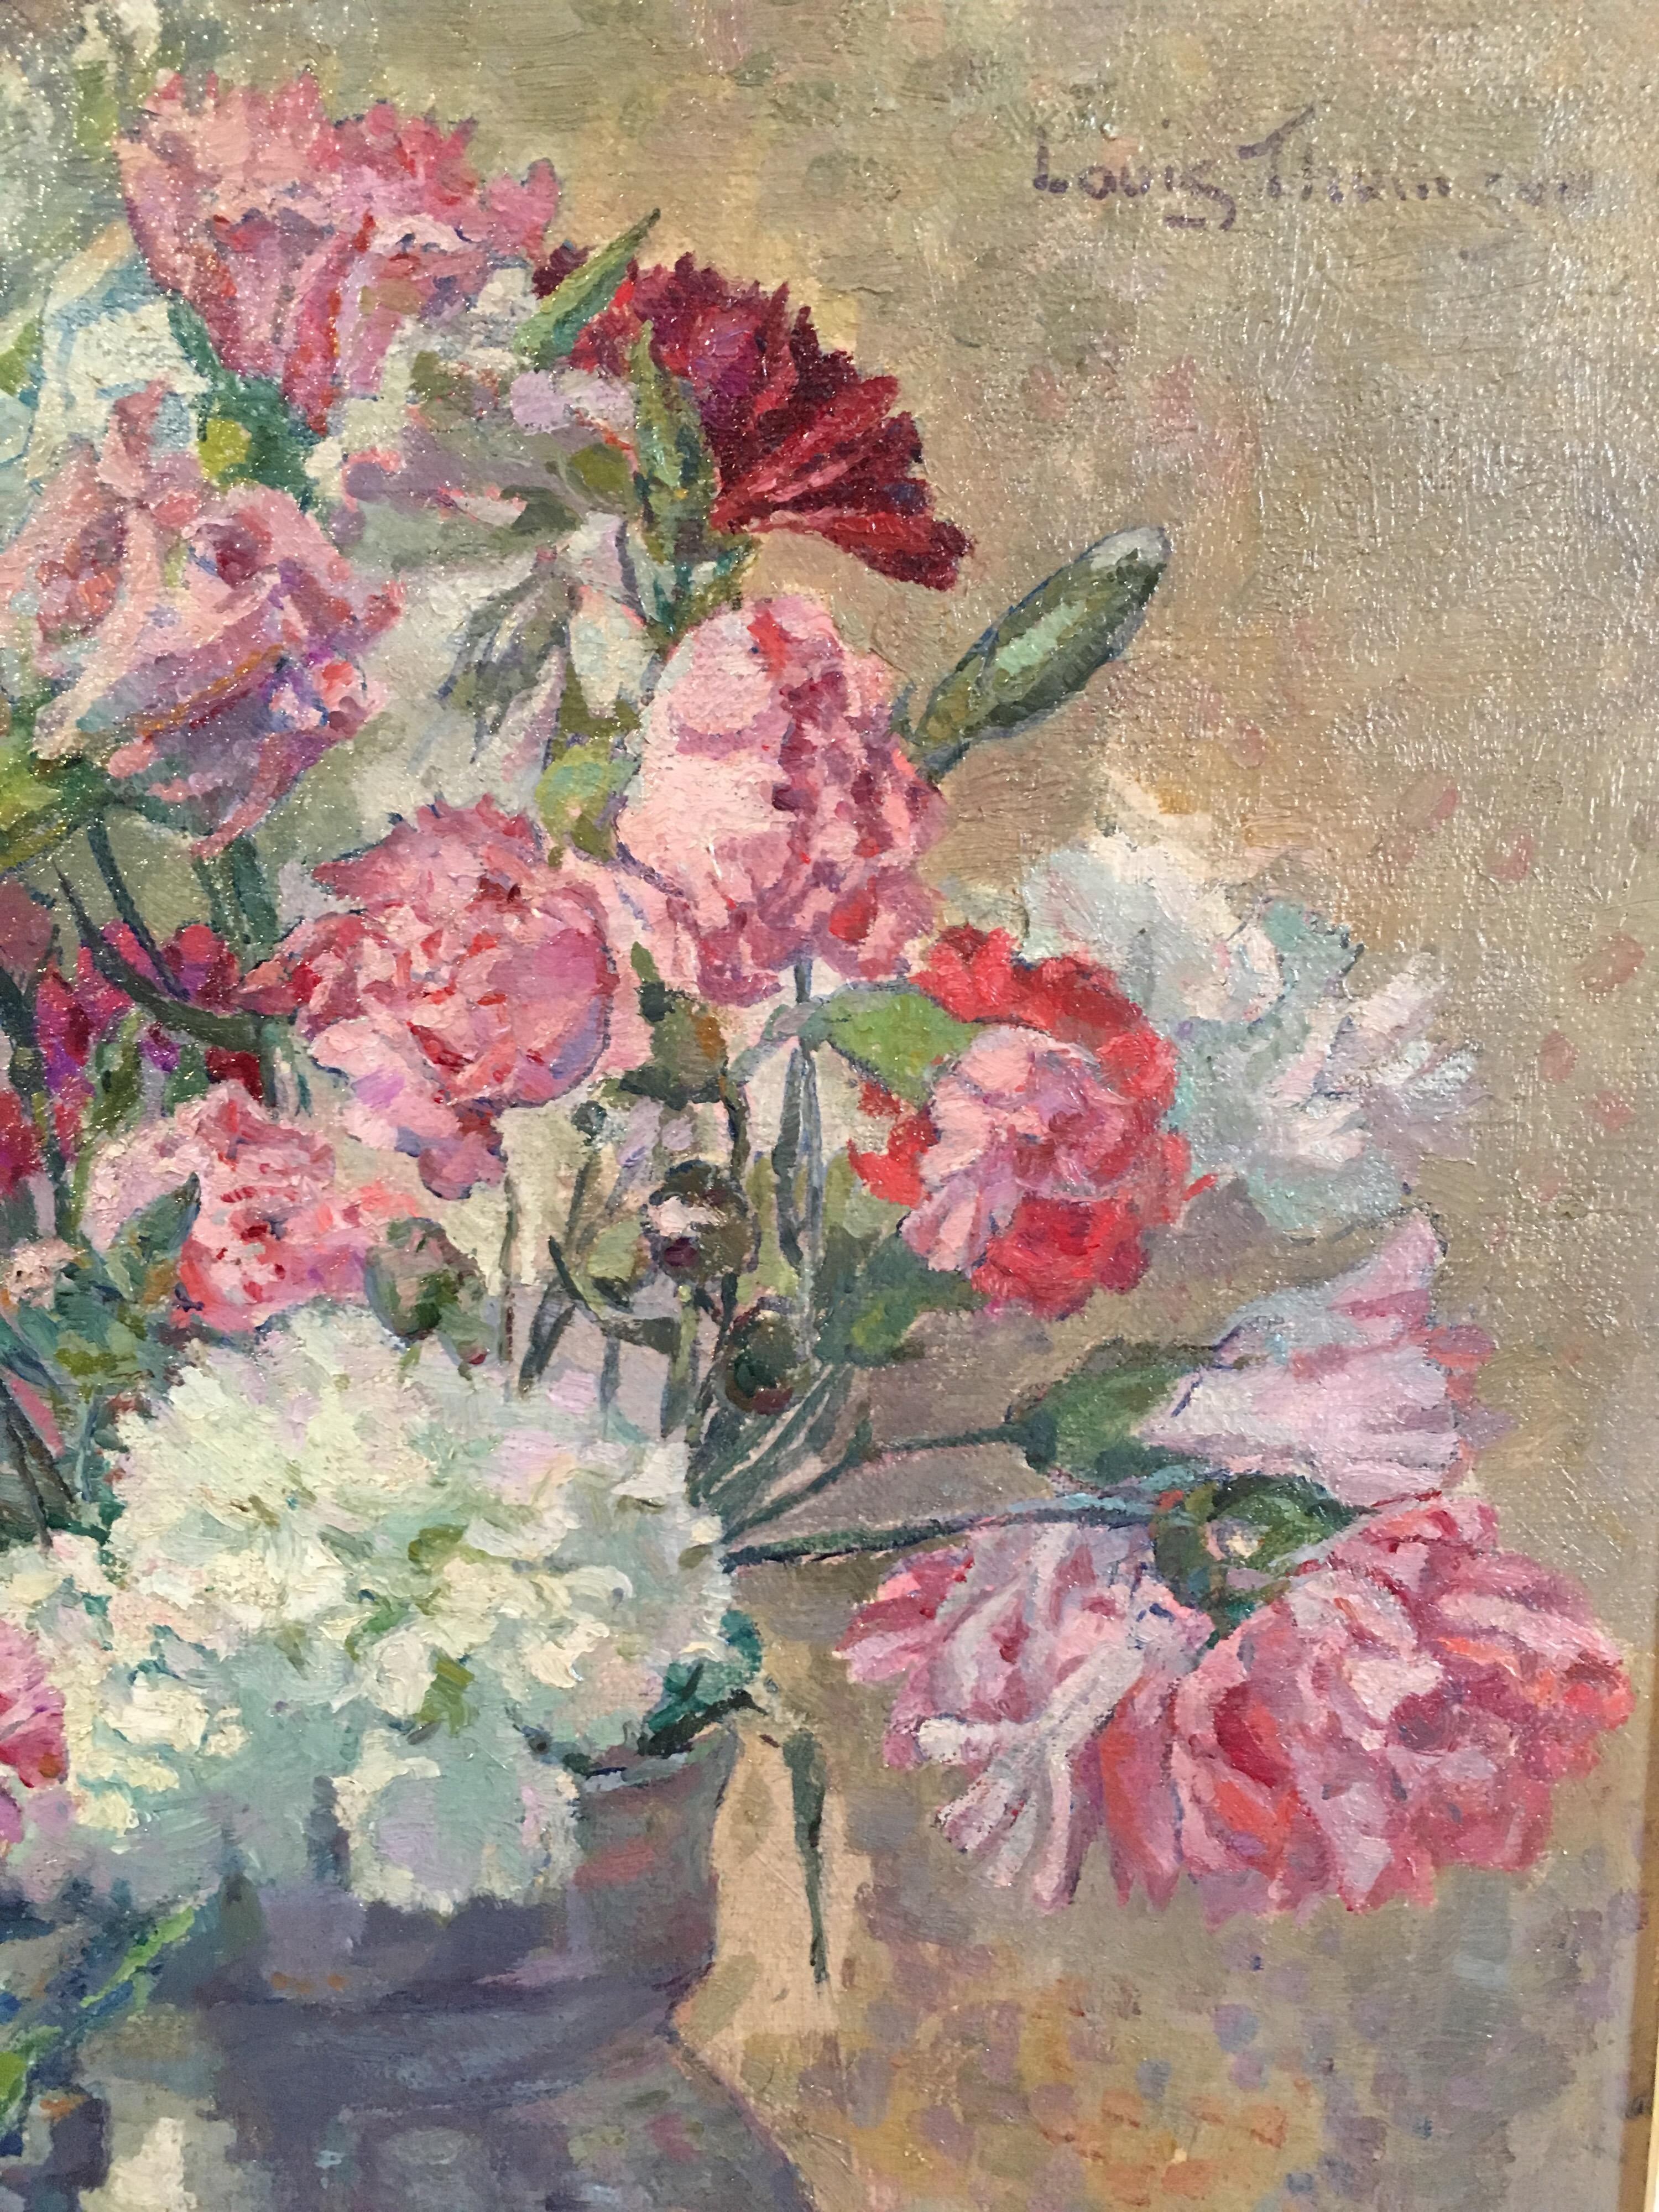 Carnations, Bouquet of Flowers, Floral Oil Painting, Signed
By French artist, Louis Thomson, Mid Century
Signed by the artist on the top right hand corner
Oil painting on board, framed
Framed size: 18 x 15.5 inches

Classic portrayal of a brimming